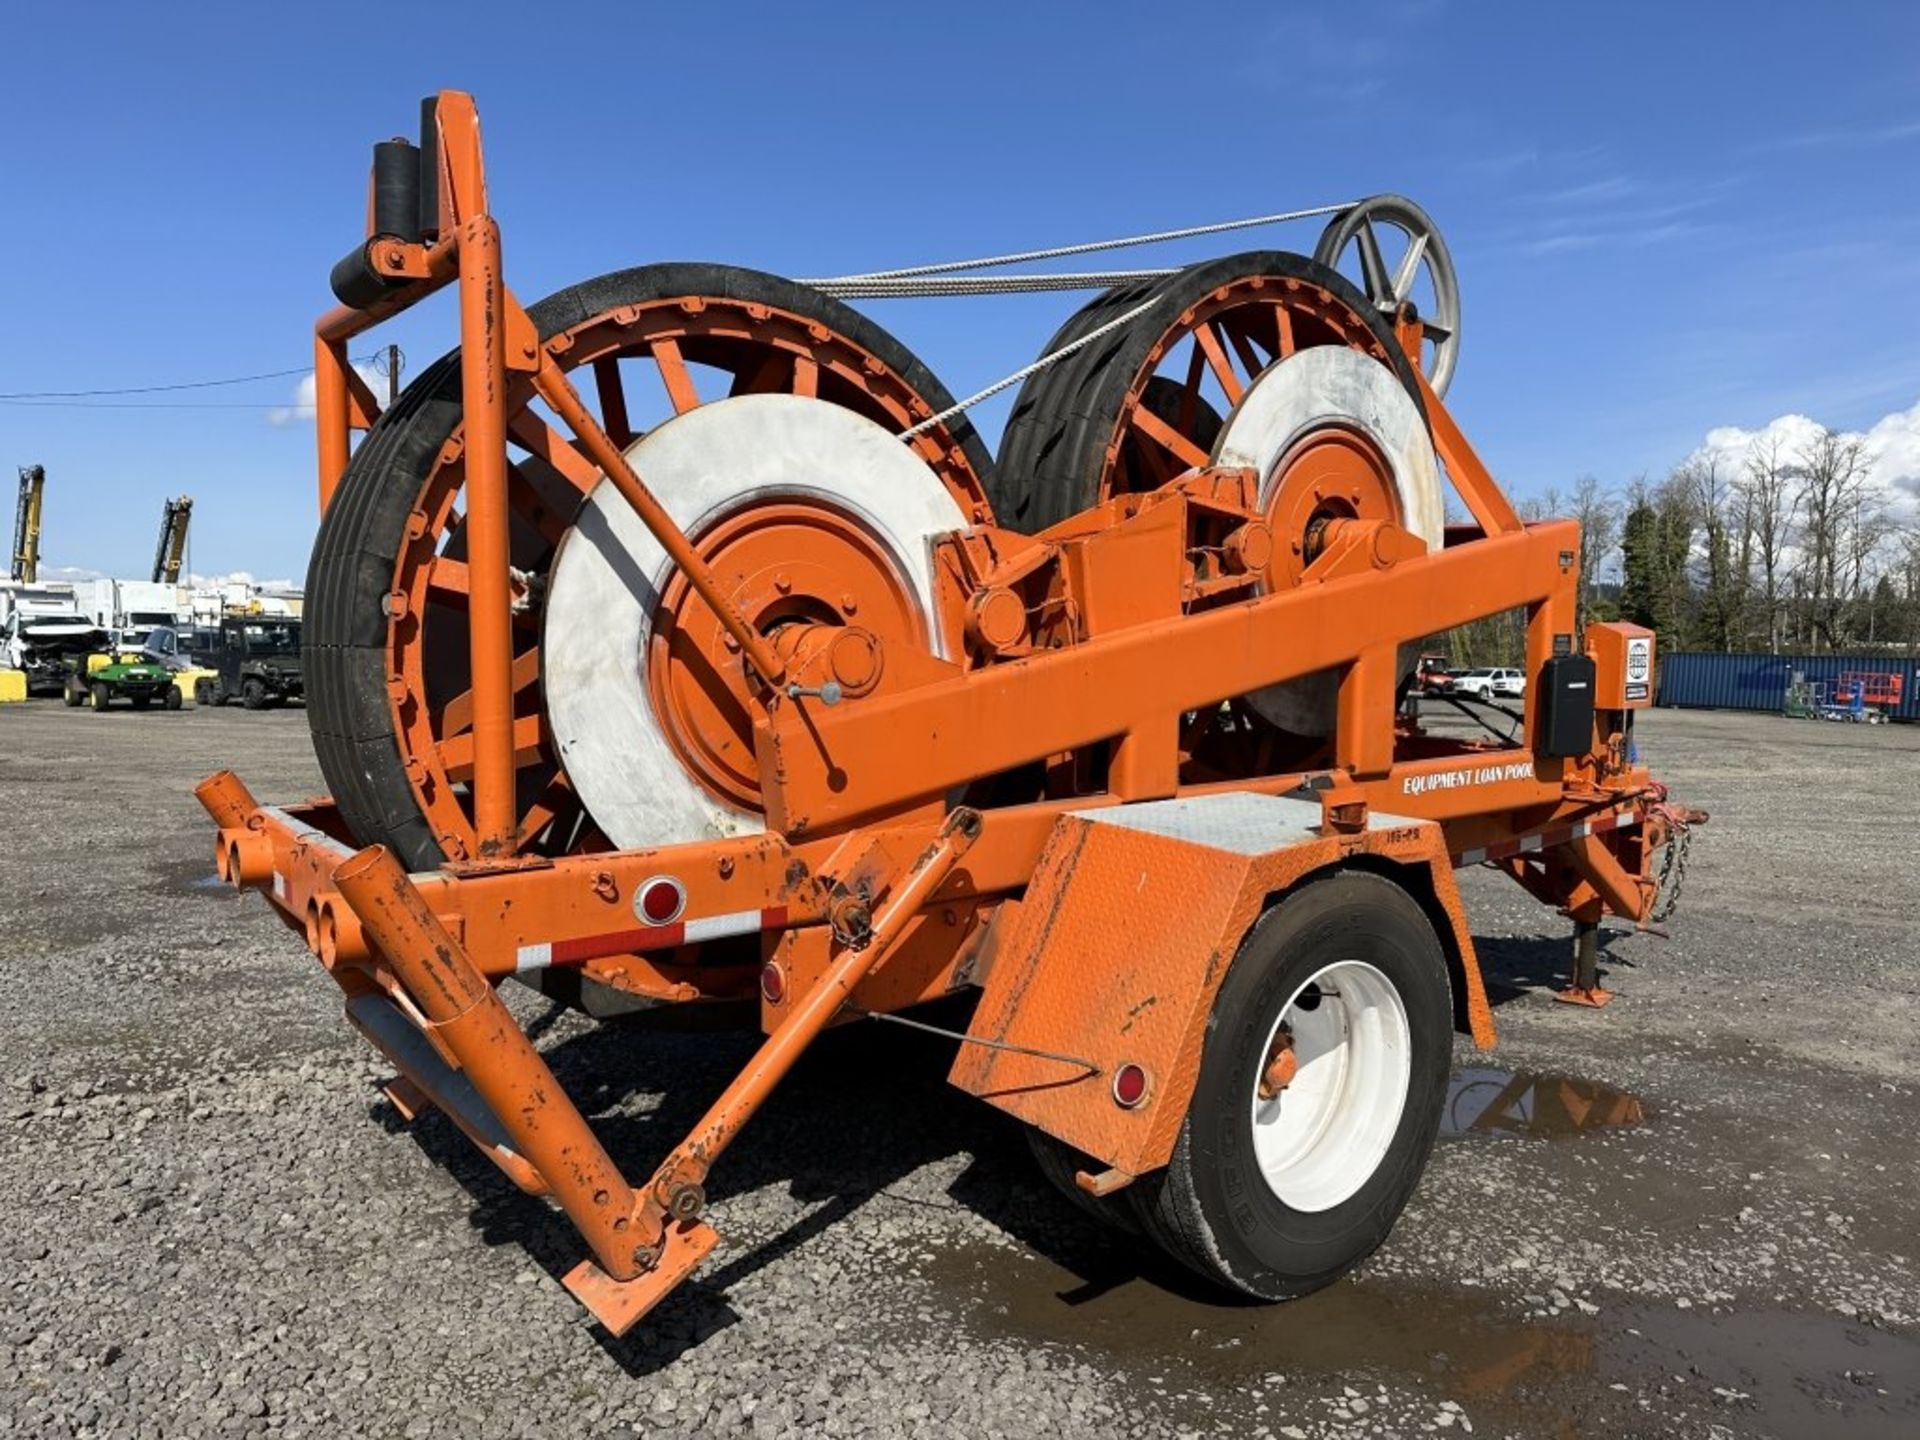 1970 Pengo 7000 TPI Towable Cable Puller - Image 4 of 28